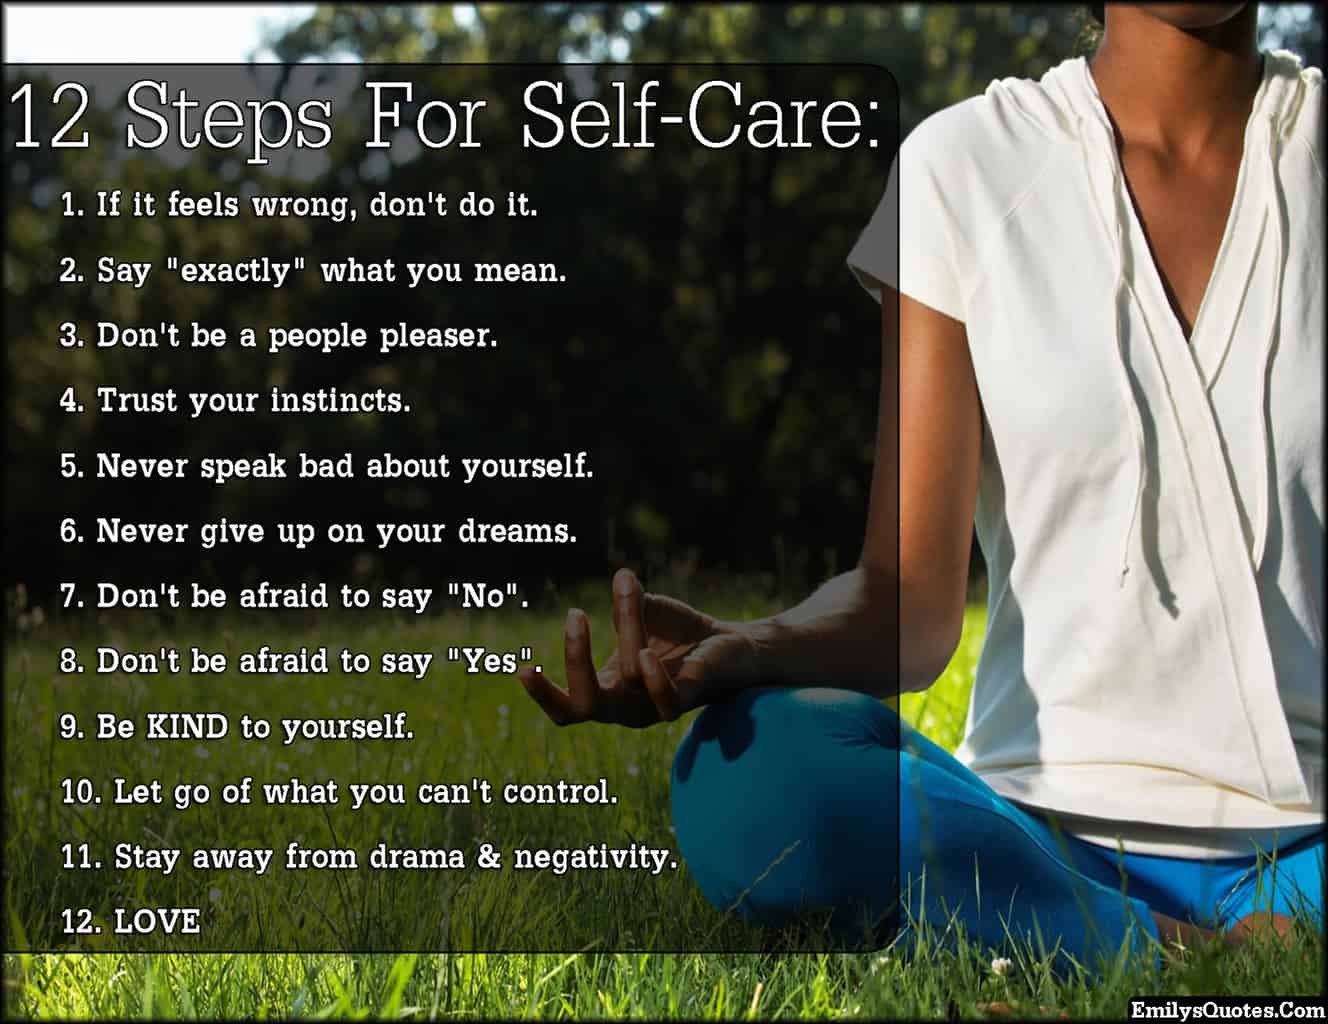 It's Wellness Wednesday! Take care of yourself because no one else will